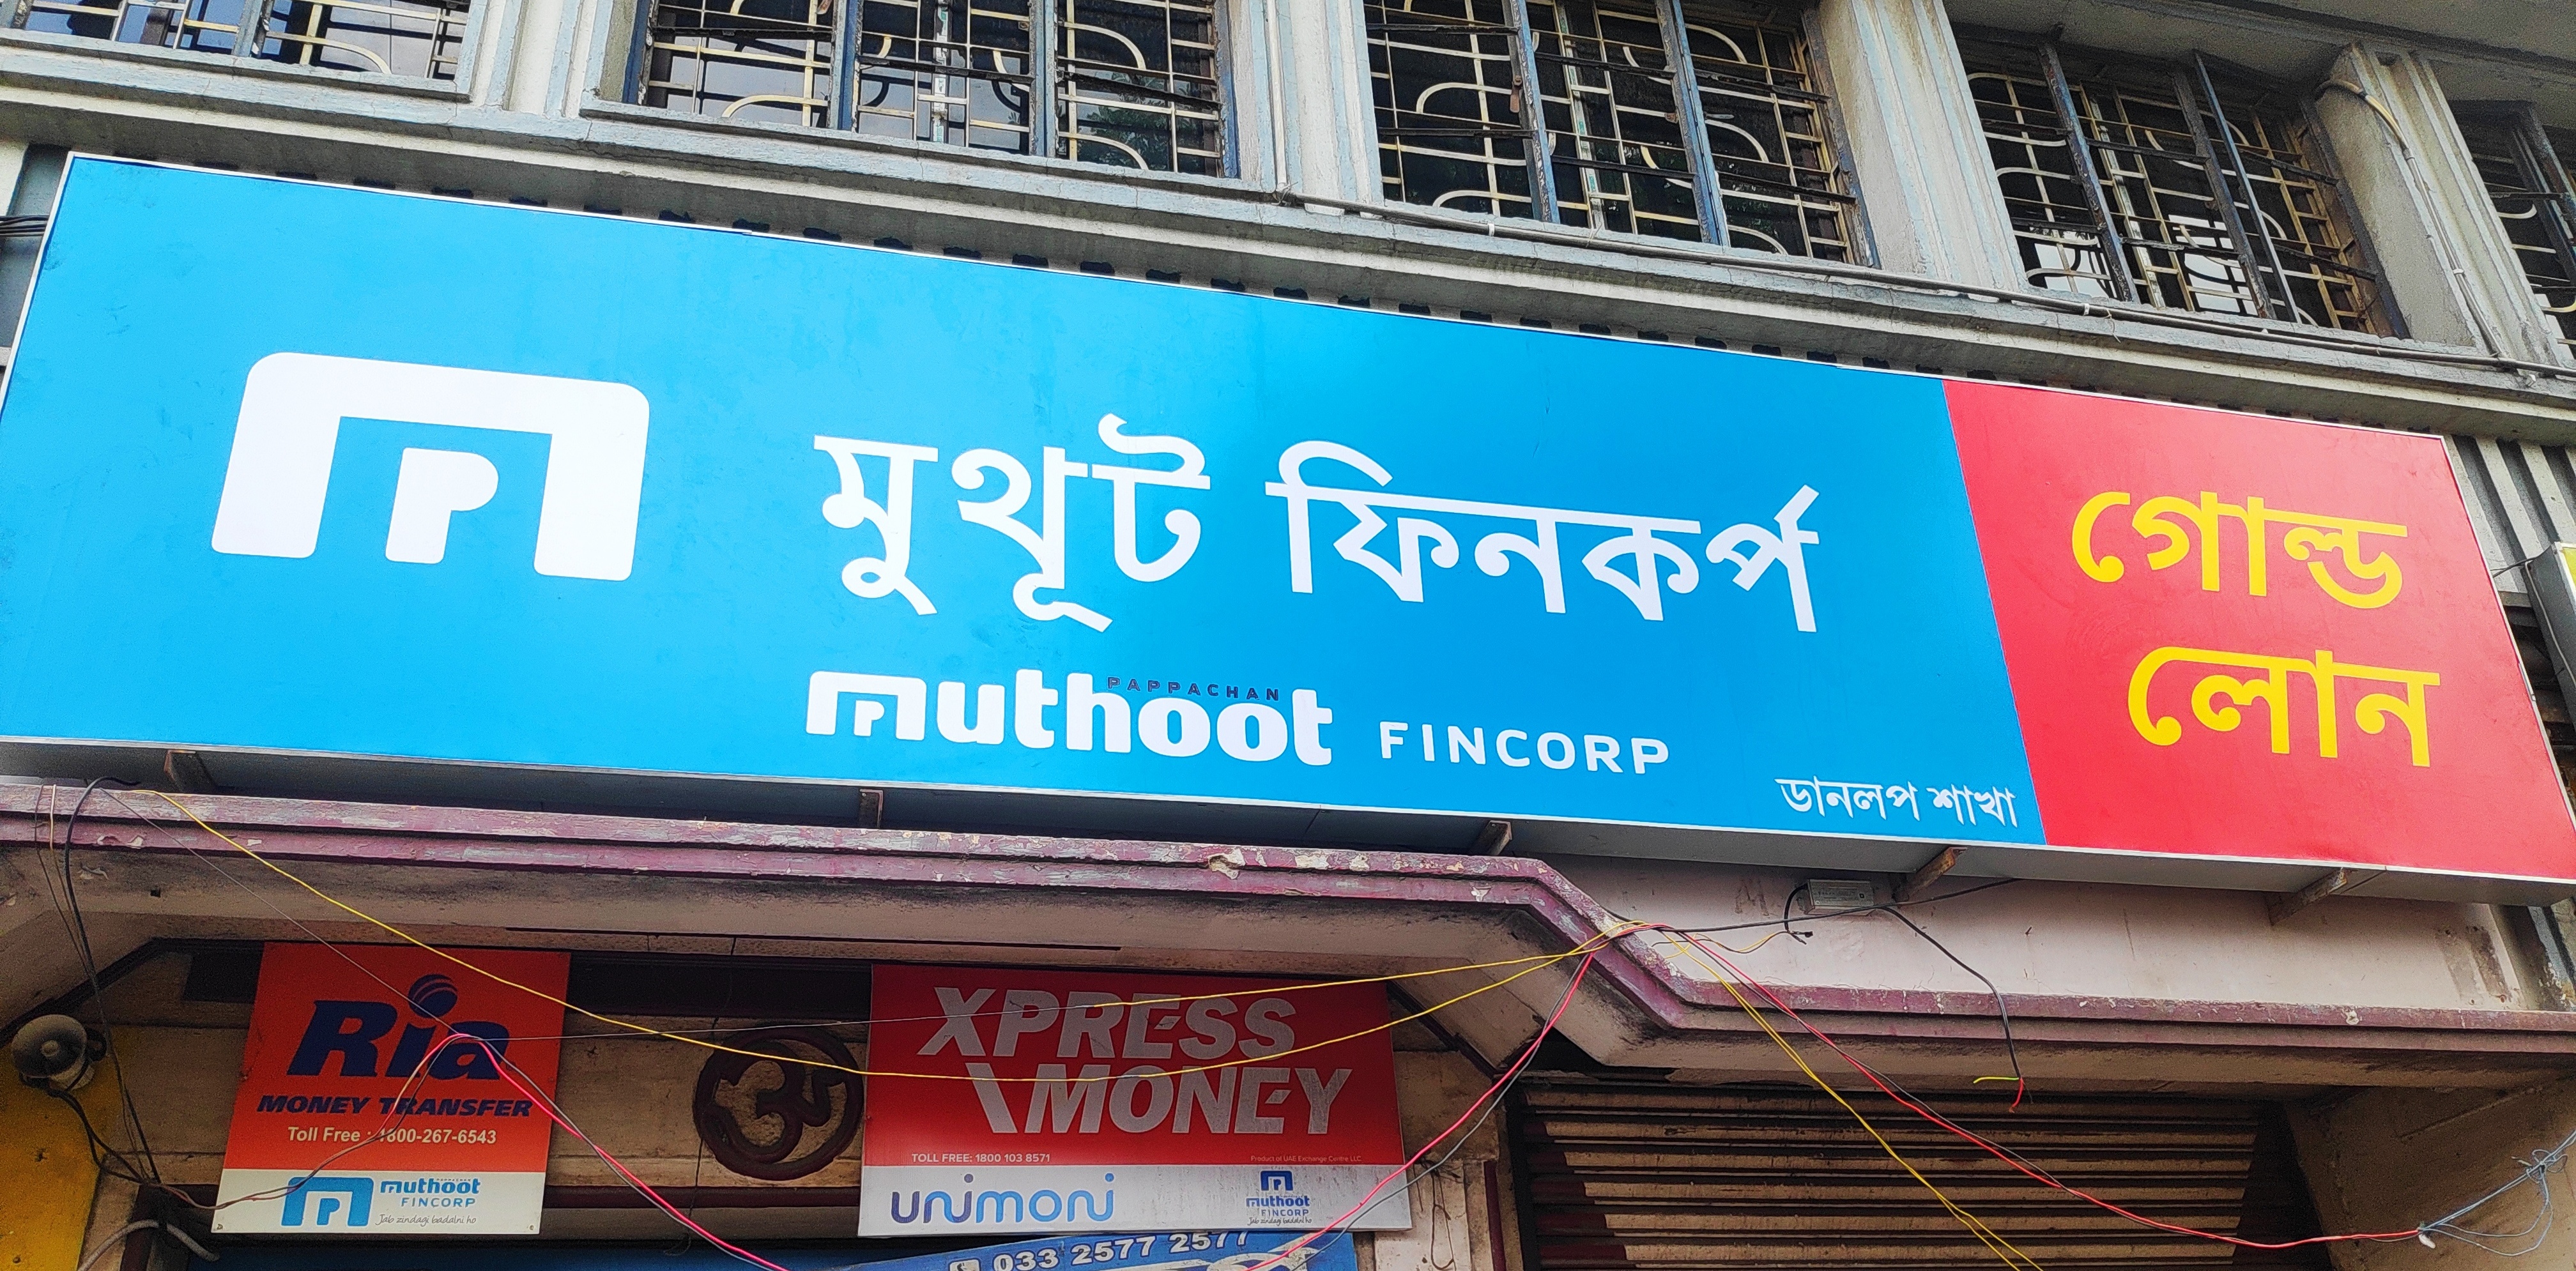 Muthoot Fincorp Gold Loan Services in Dum Dum Cantt, Kolkata, West Bengal